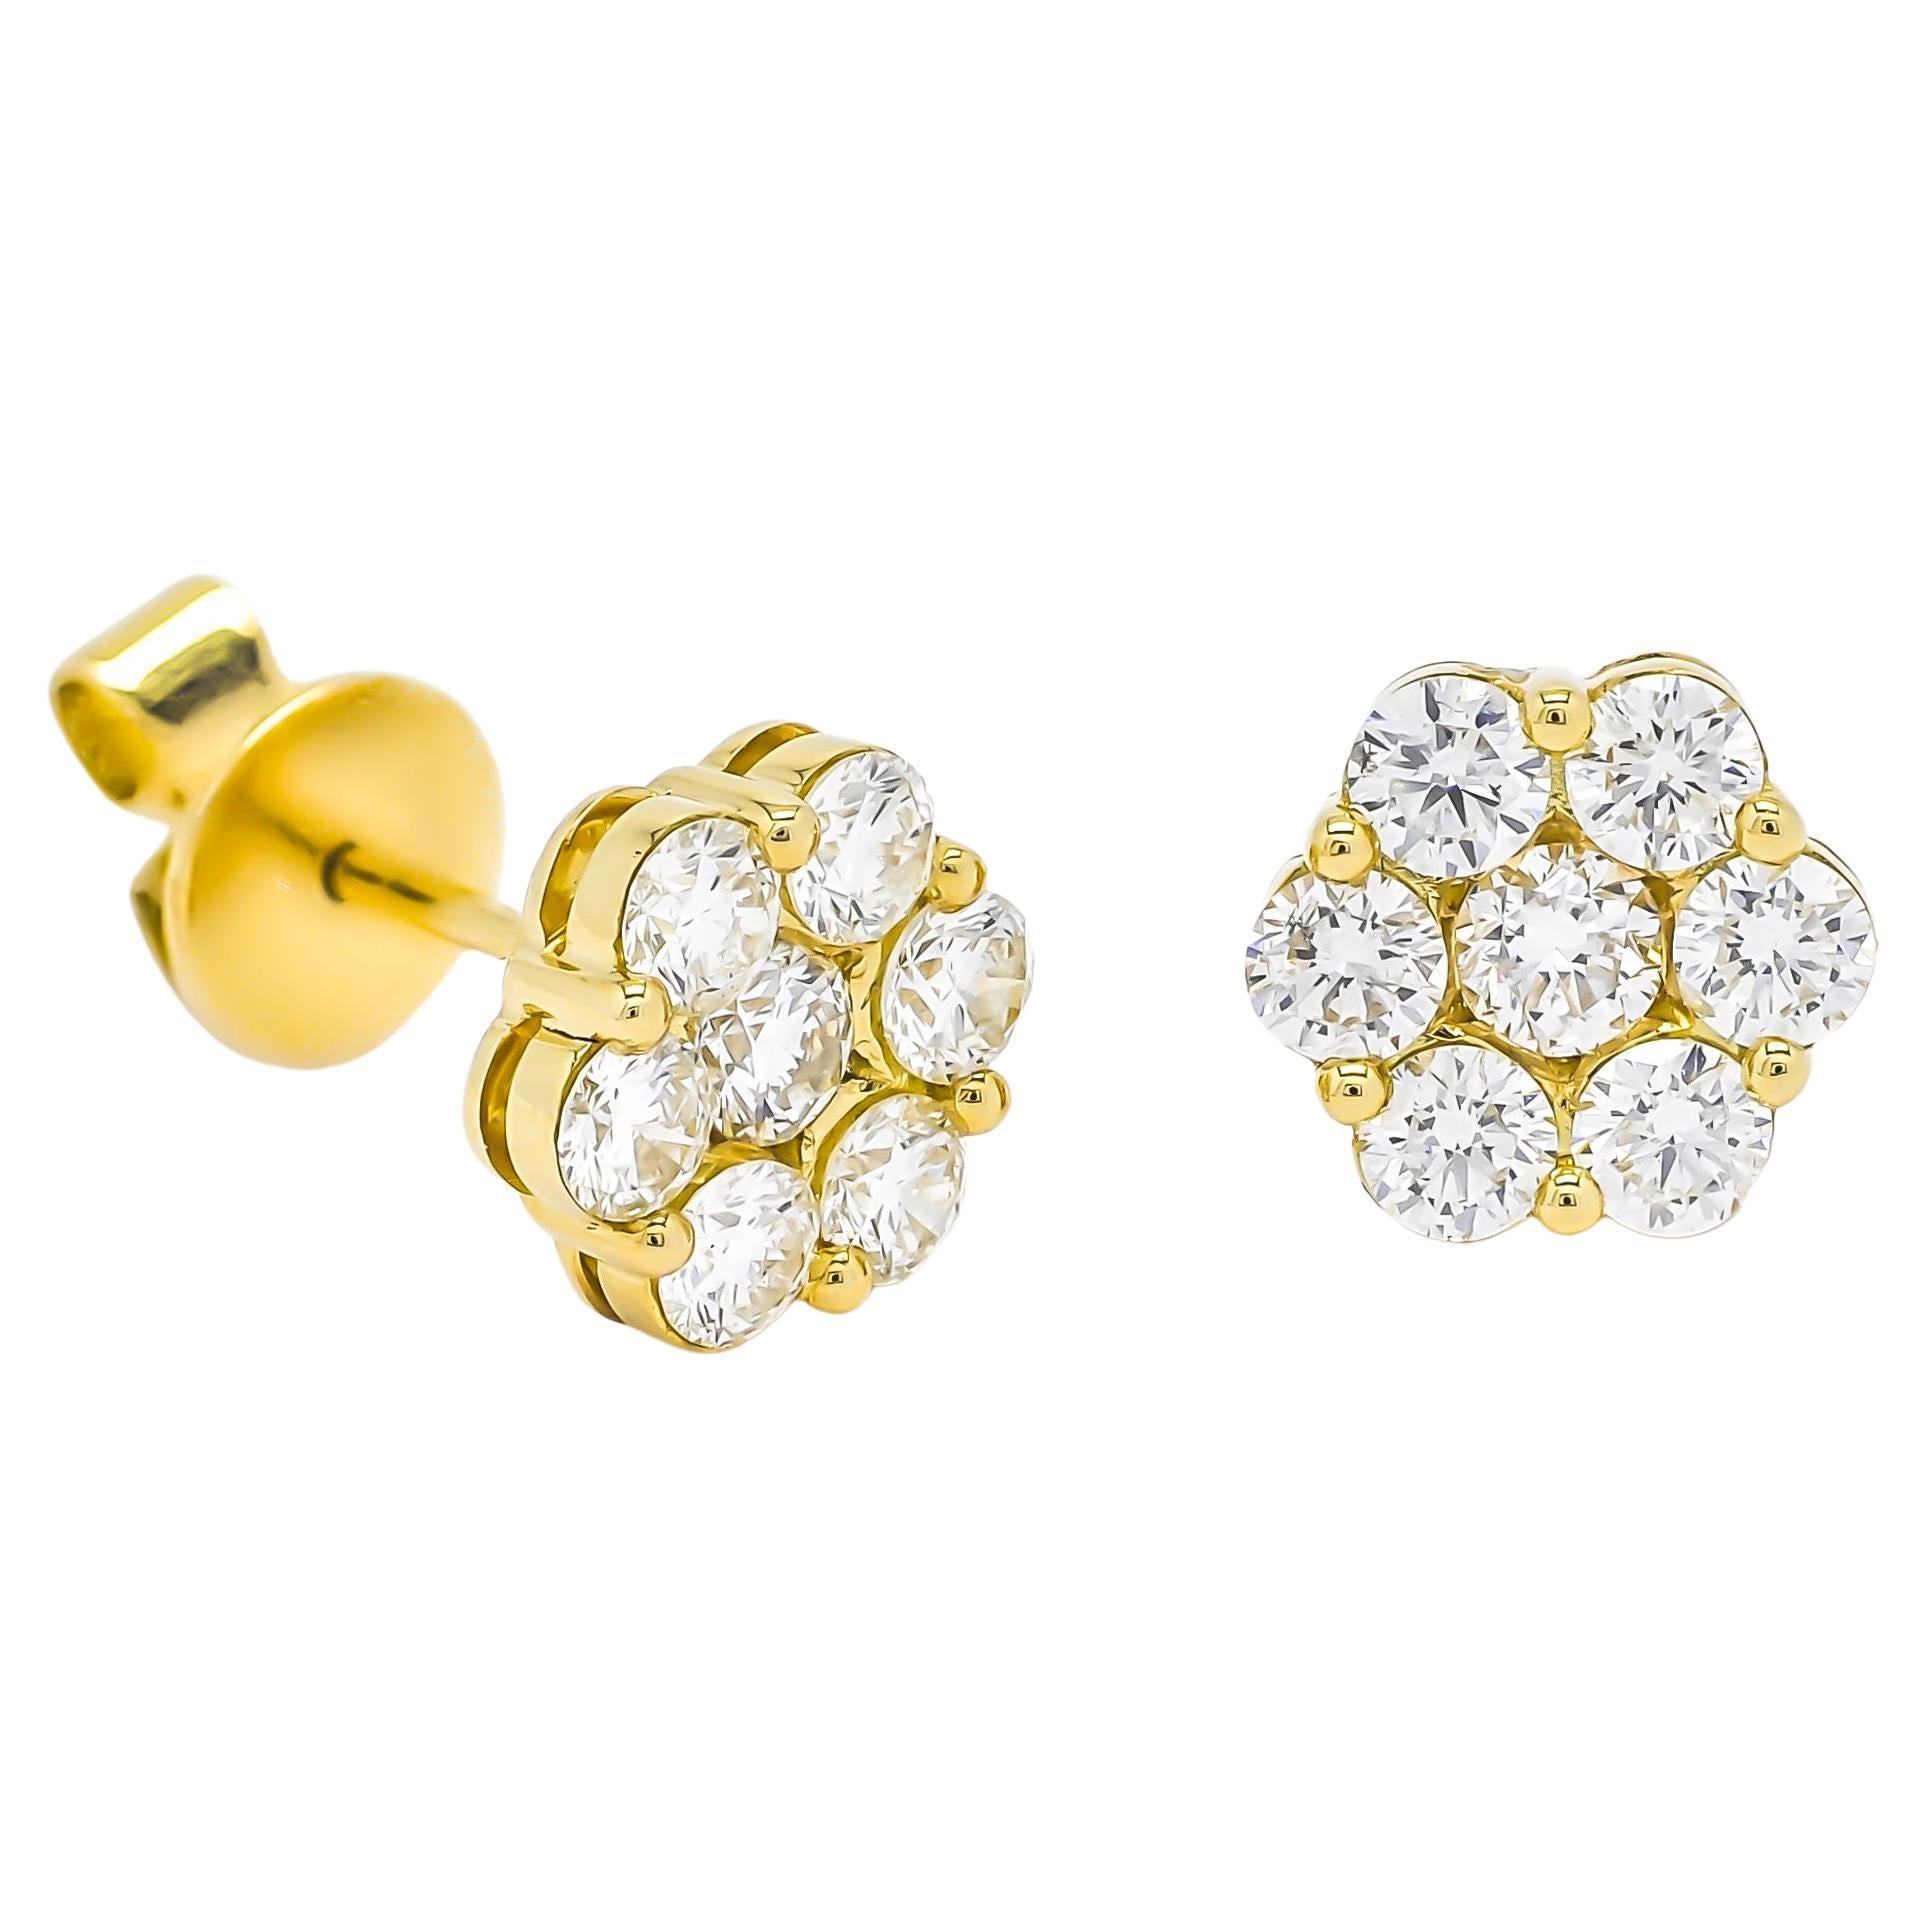 Natural Diamond 1.00 cts in 18 Karat Yellow Gold classic Cluster Earrings For Sale